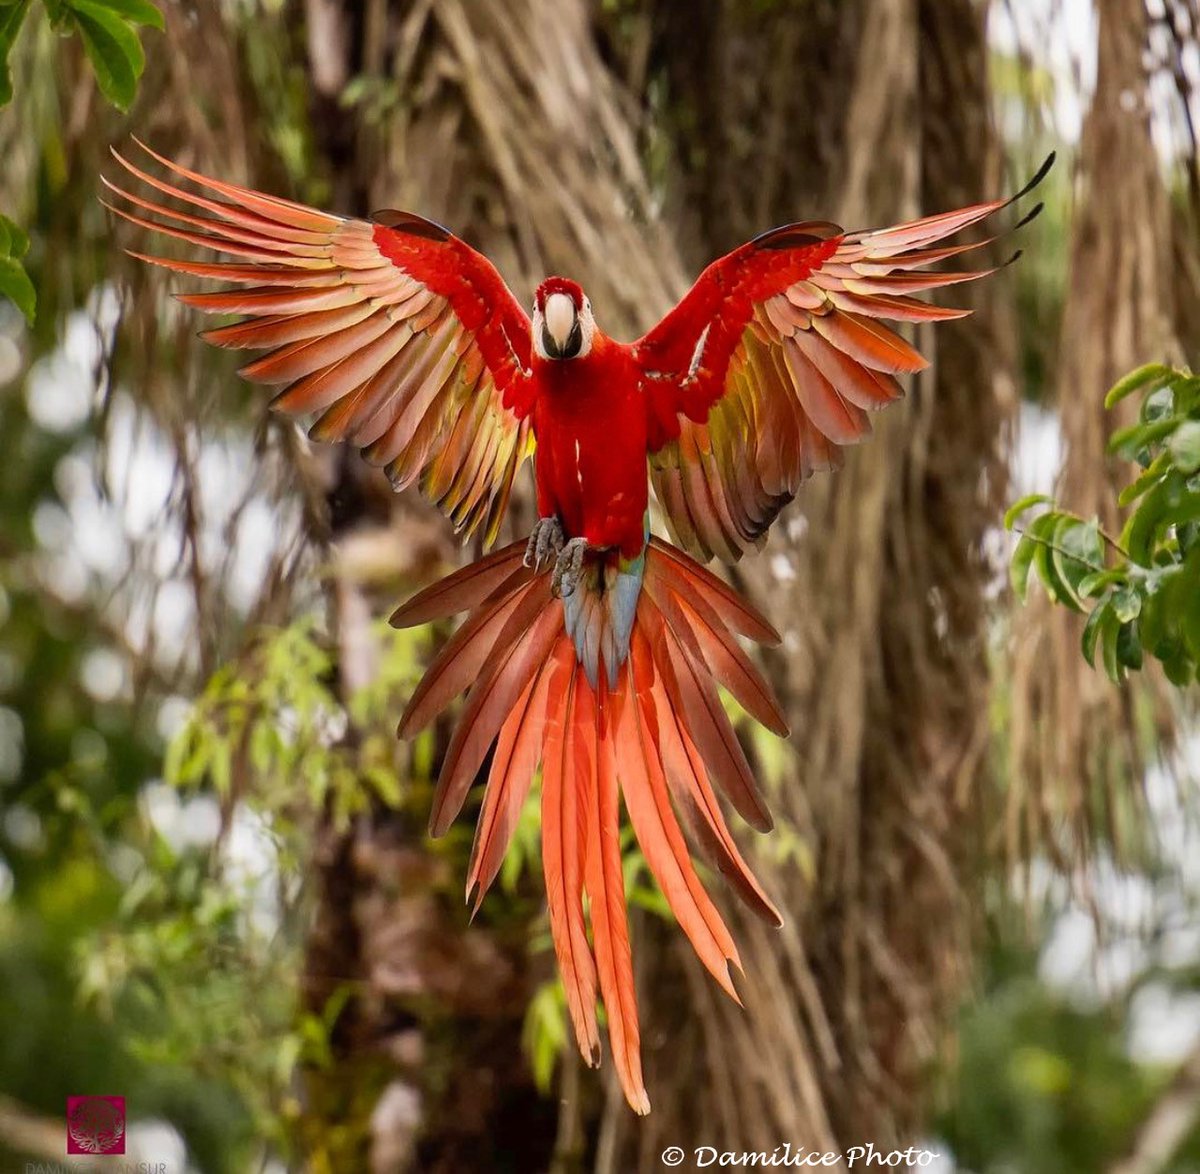 For #WorldParrotDay here's a close-up of the endangered scarlet macaw in Costa Rica in flight. 
*Click to view Full Image* @ThePhotoHour #NaturePhotography #birdphotography #wildlifephotography #TwitterNatureCommunity #CostaRica